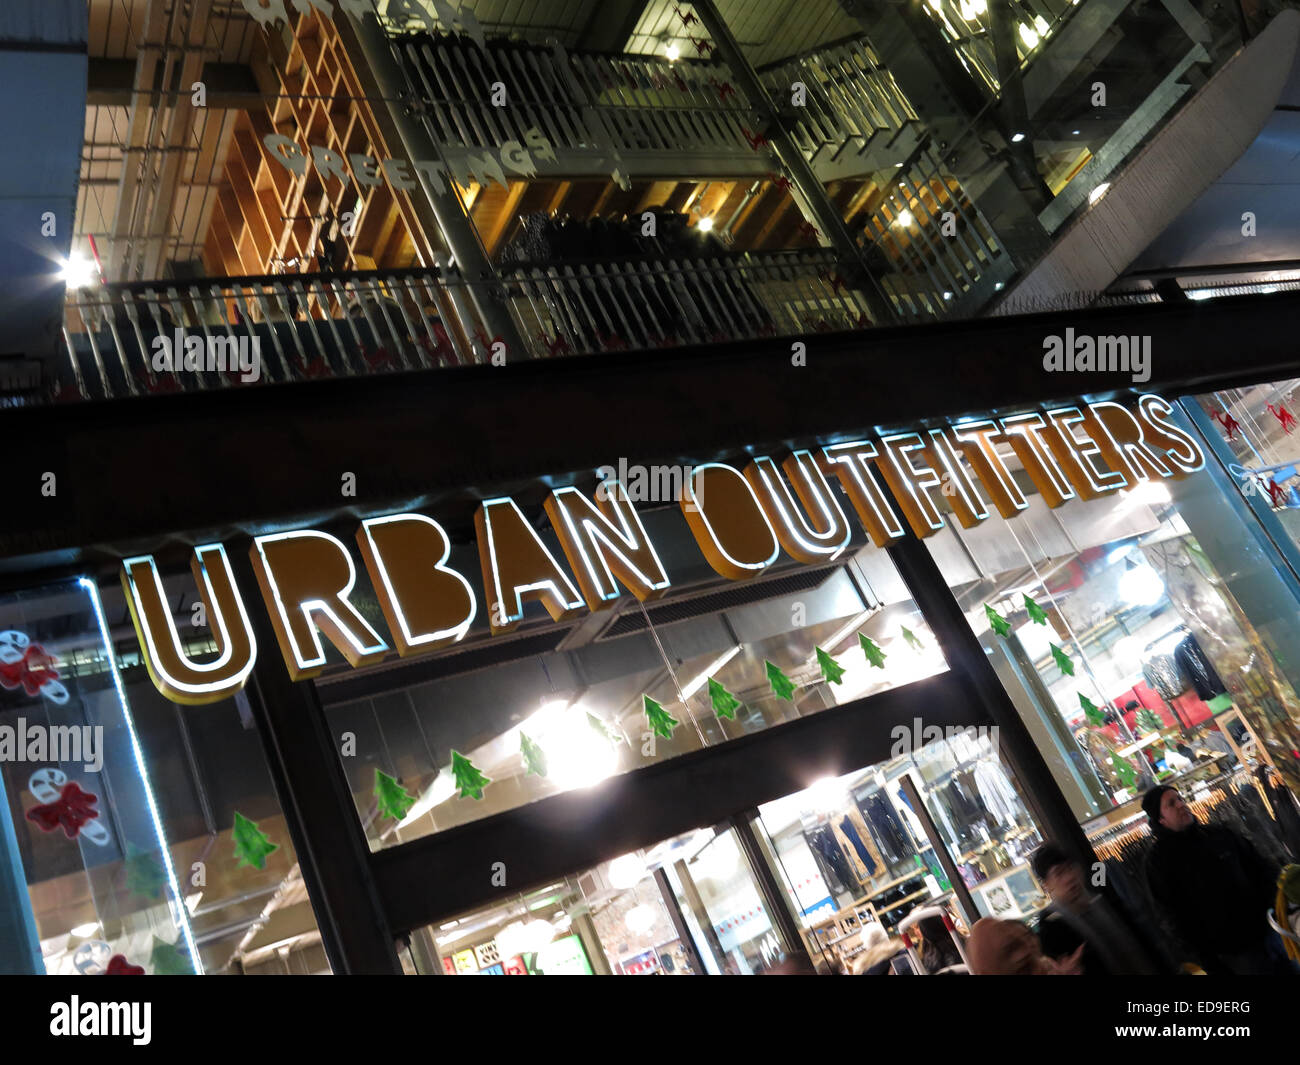 Urban Outfitters Shopfront at Night, 42-43 Market St, Manchester, Angleterre, Royaume-Uni, M1 1 MITSUBISHI Banque D'Images